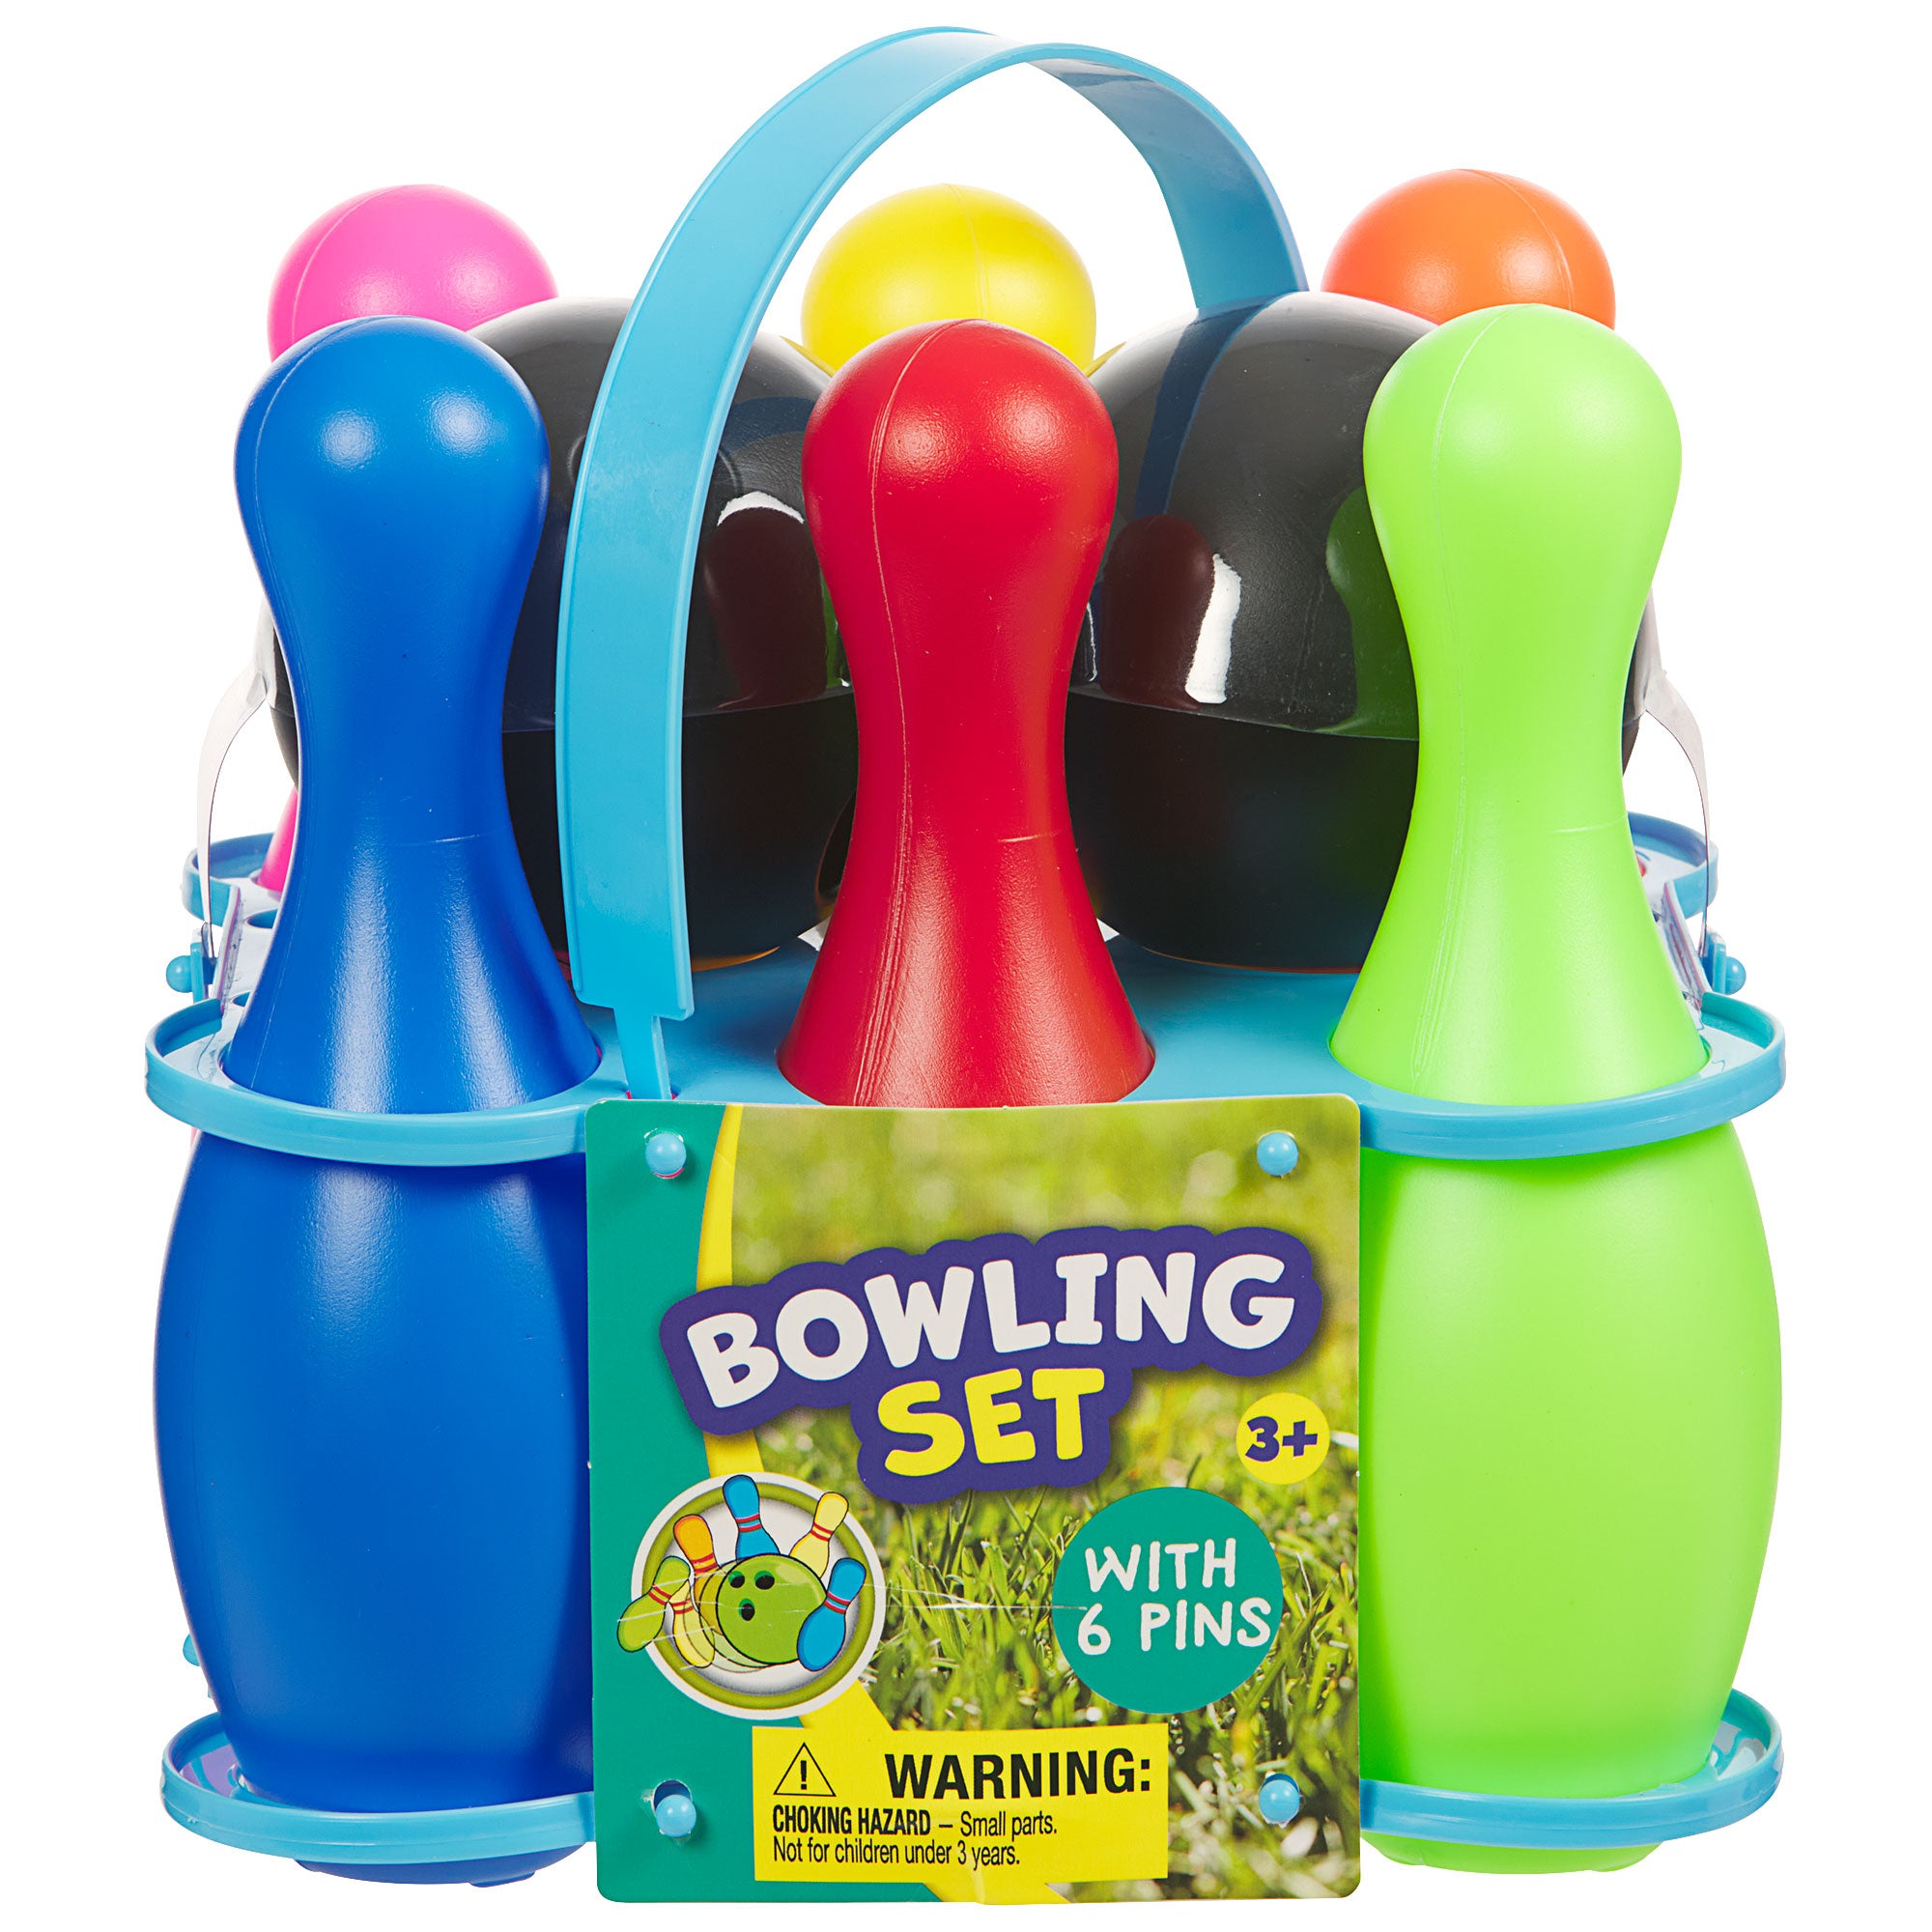 Bowling Set With 6 Pins The Reject Shop